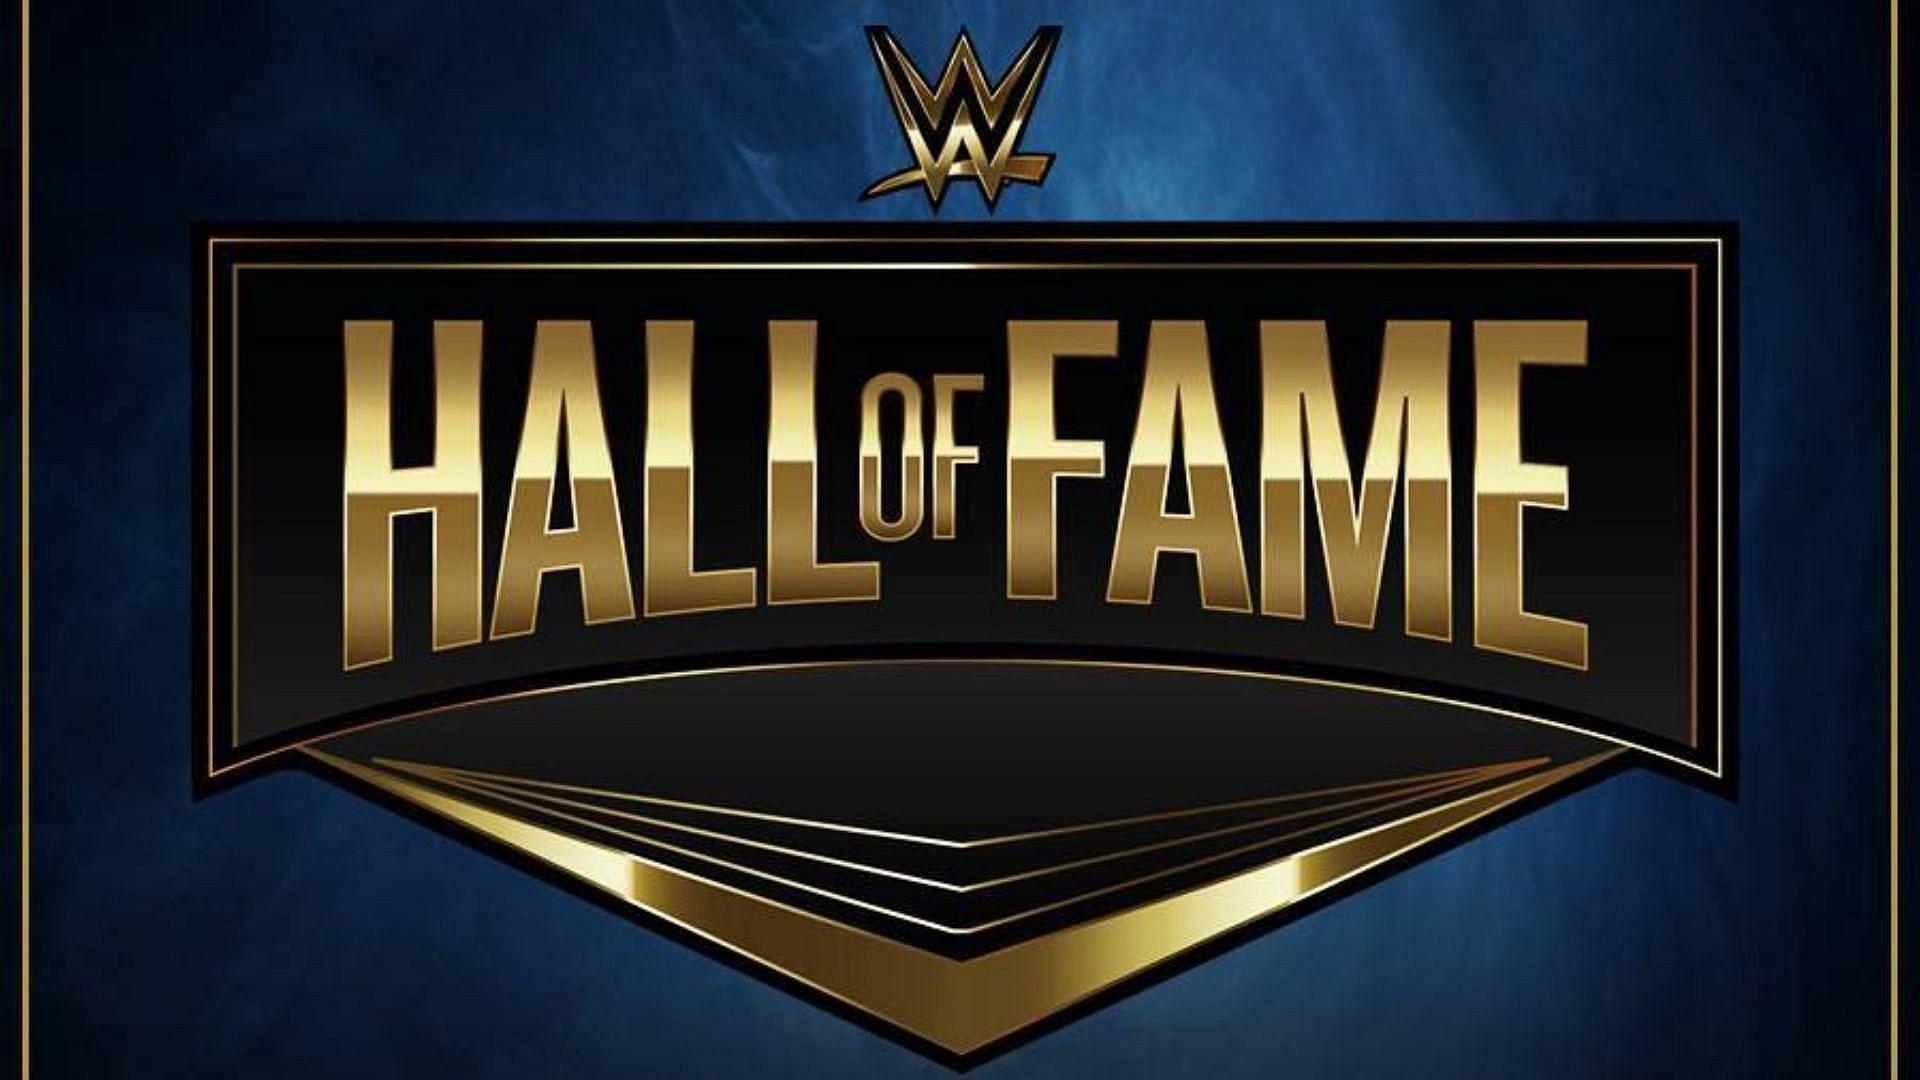 The WWE Hall of Fame has been using this logo since 2019.